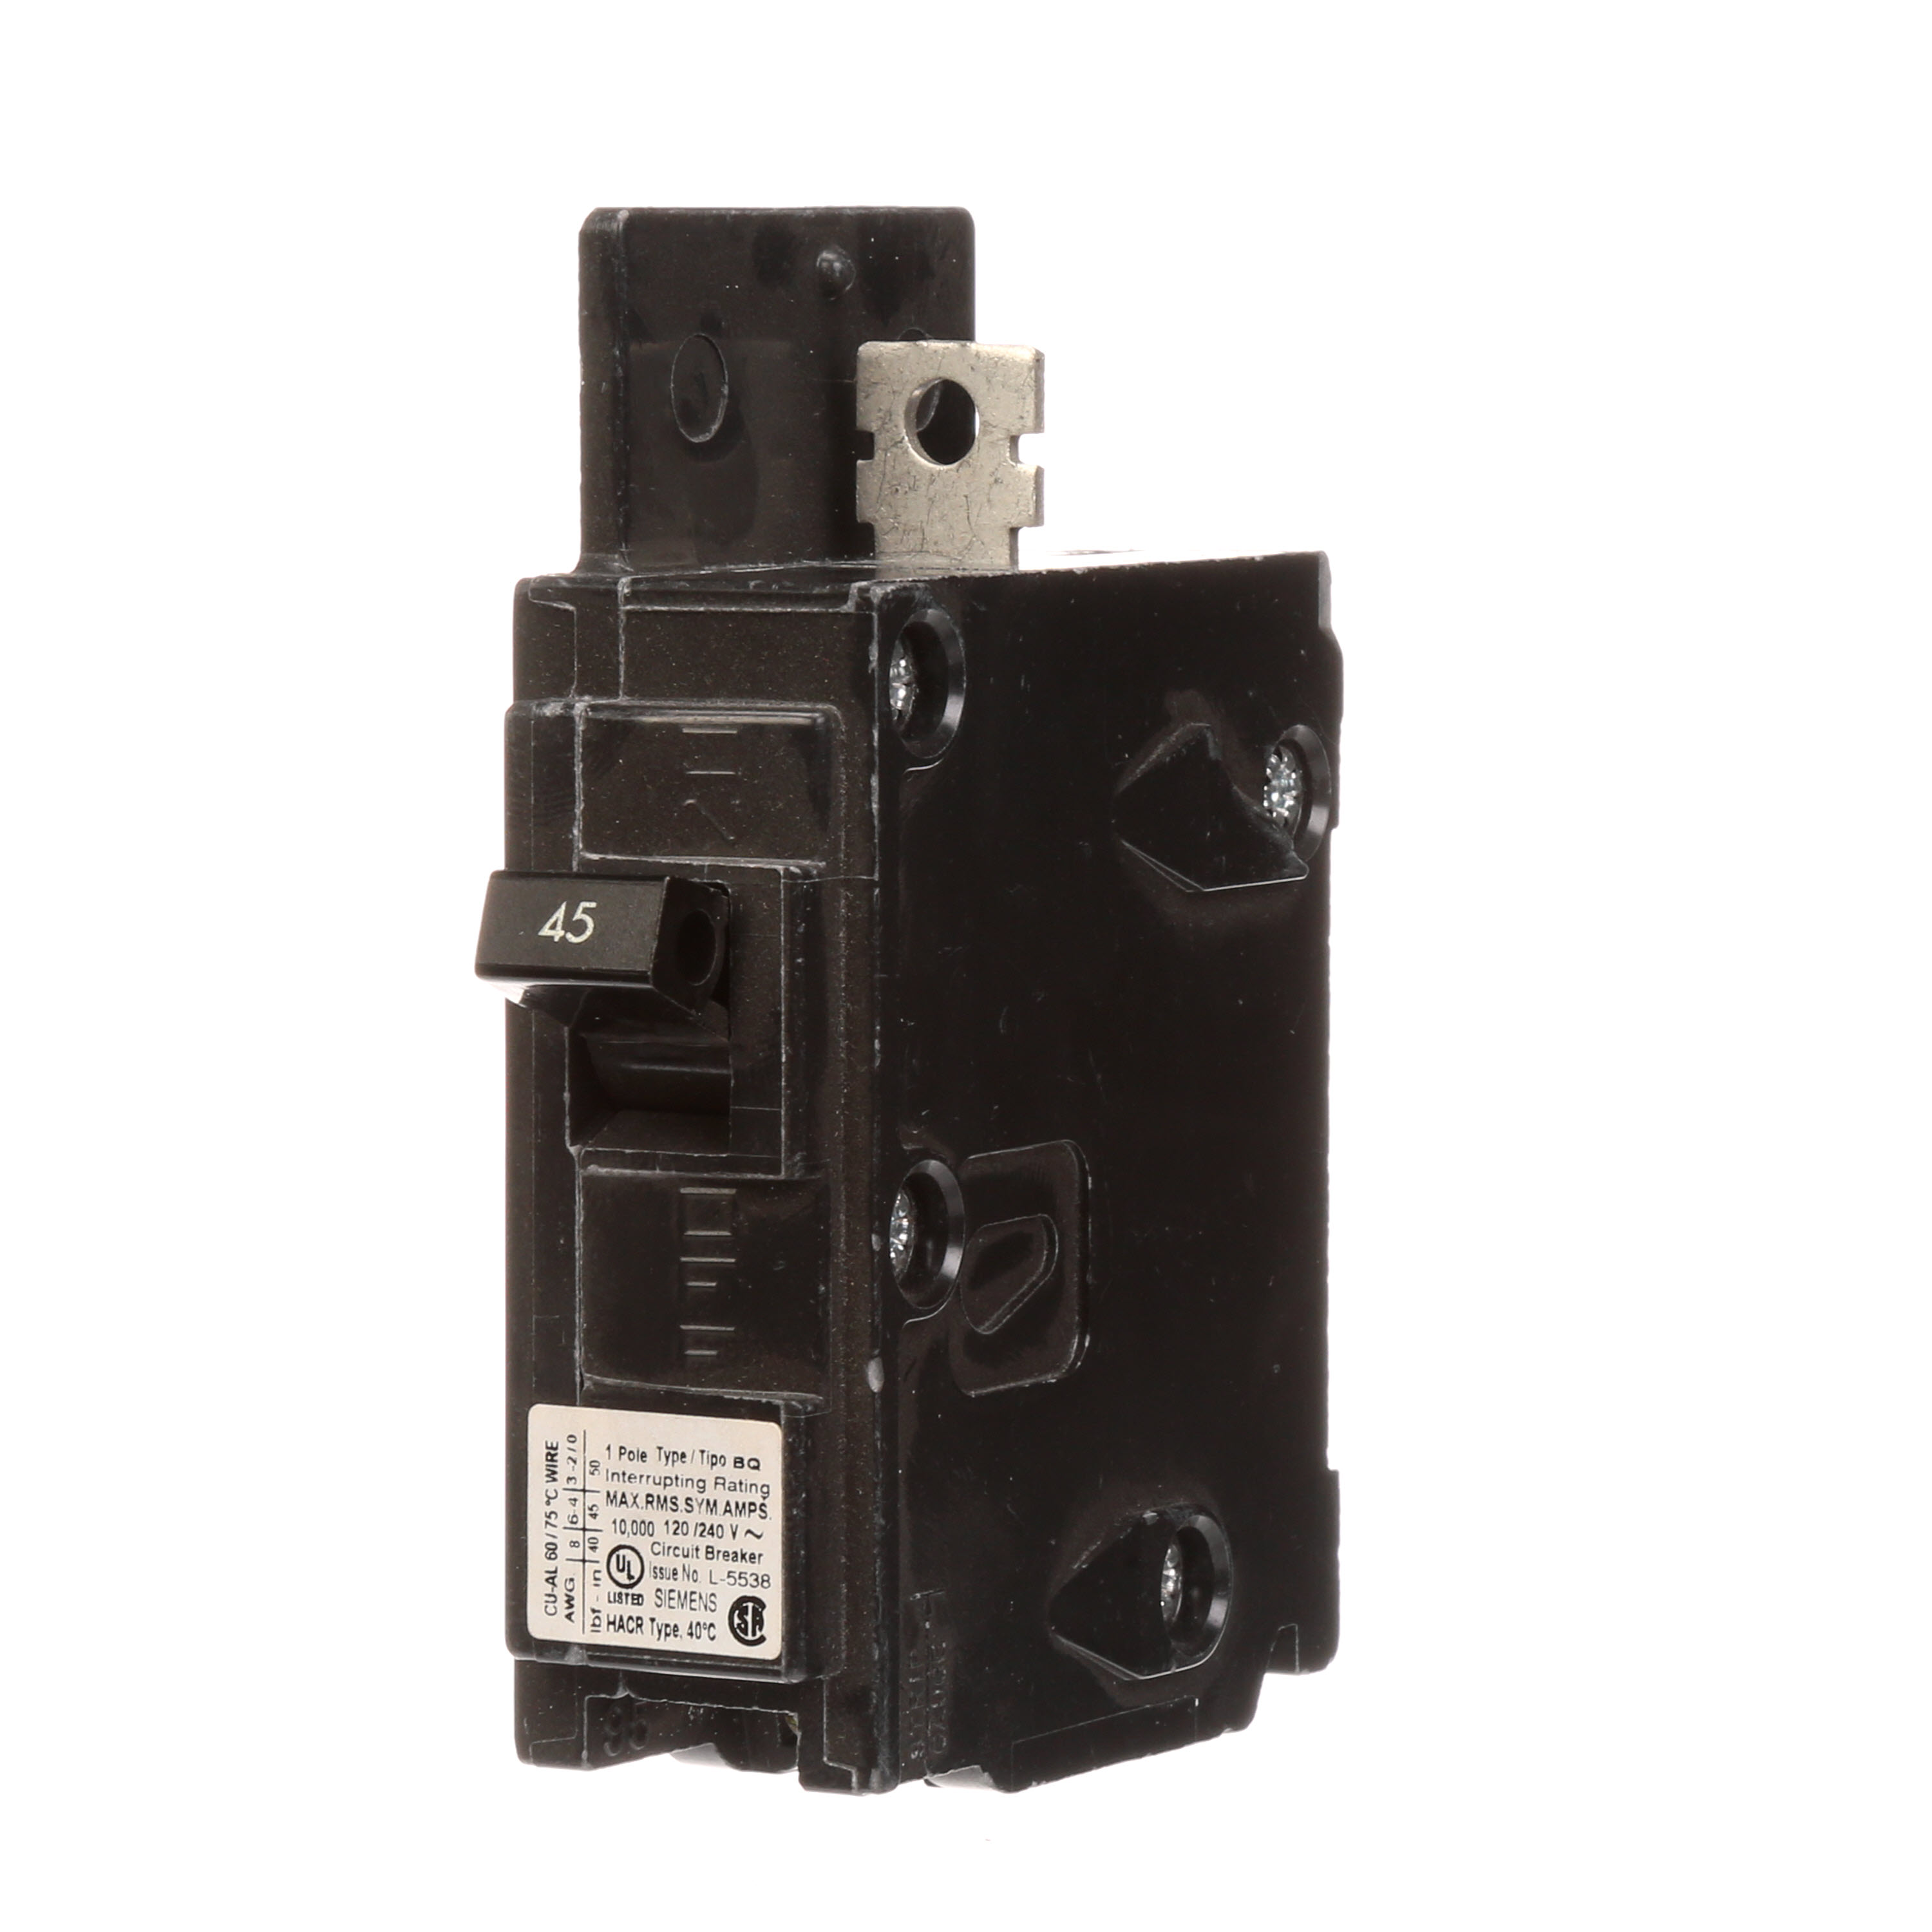 Siemens Low Voltage Molded Case Circuit Breakers General Purpose MCCBs are Circuit Protection Molded Case Circuit Breakers. 1-Pole circuit breaker type BQ. Rated 120V (045A) (AIR 10 kA). Special features Load side lugs are included.